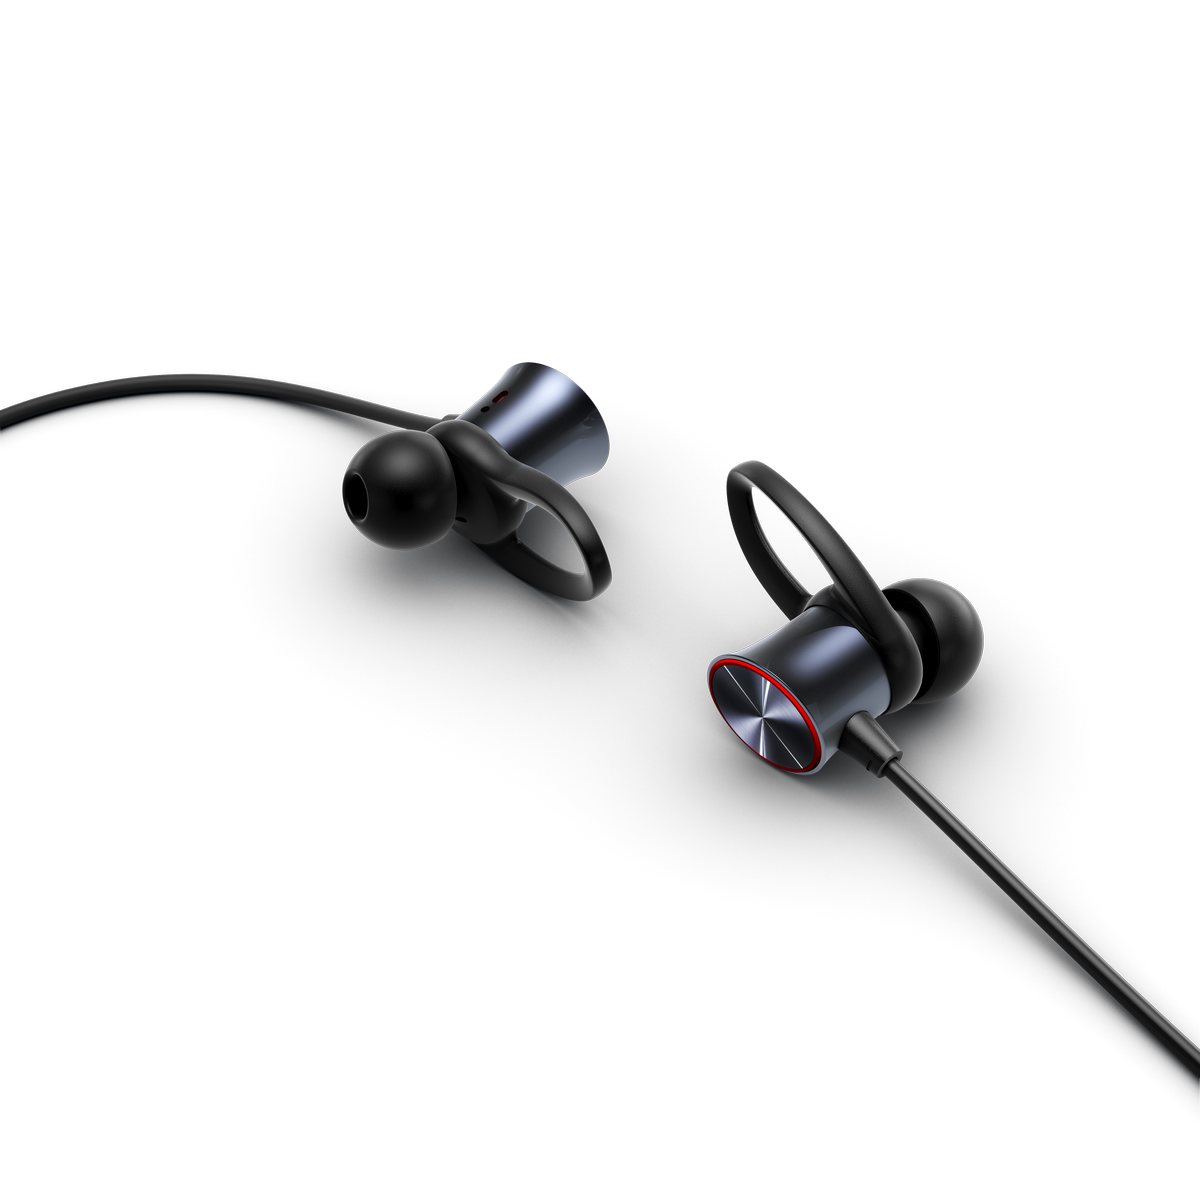 A product image of the OnePlus Bullets Wireless neckbuds against a white background.